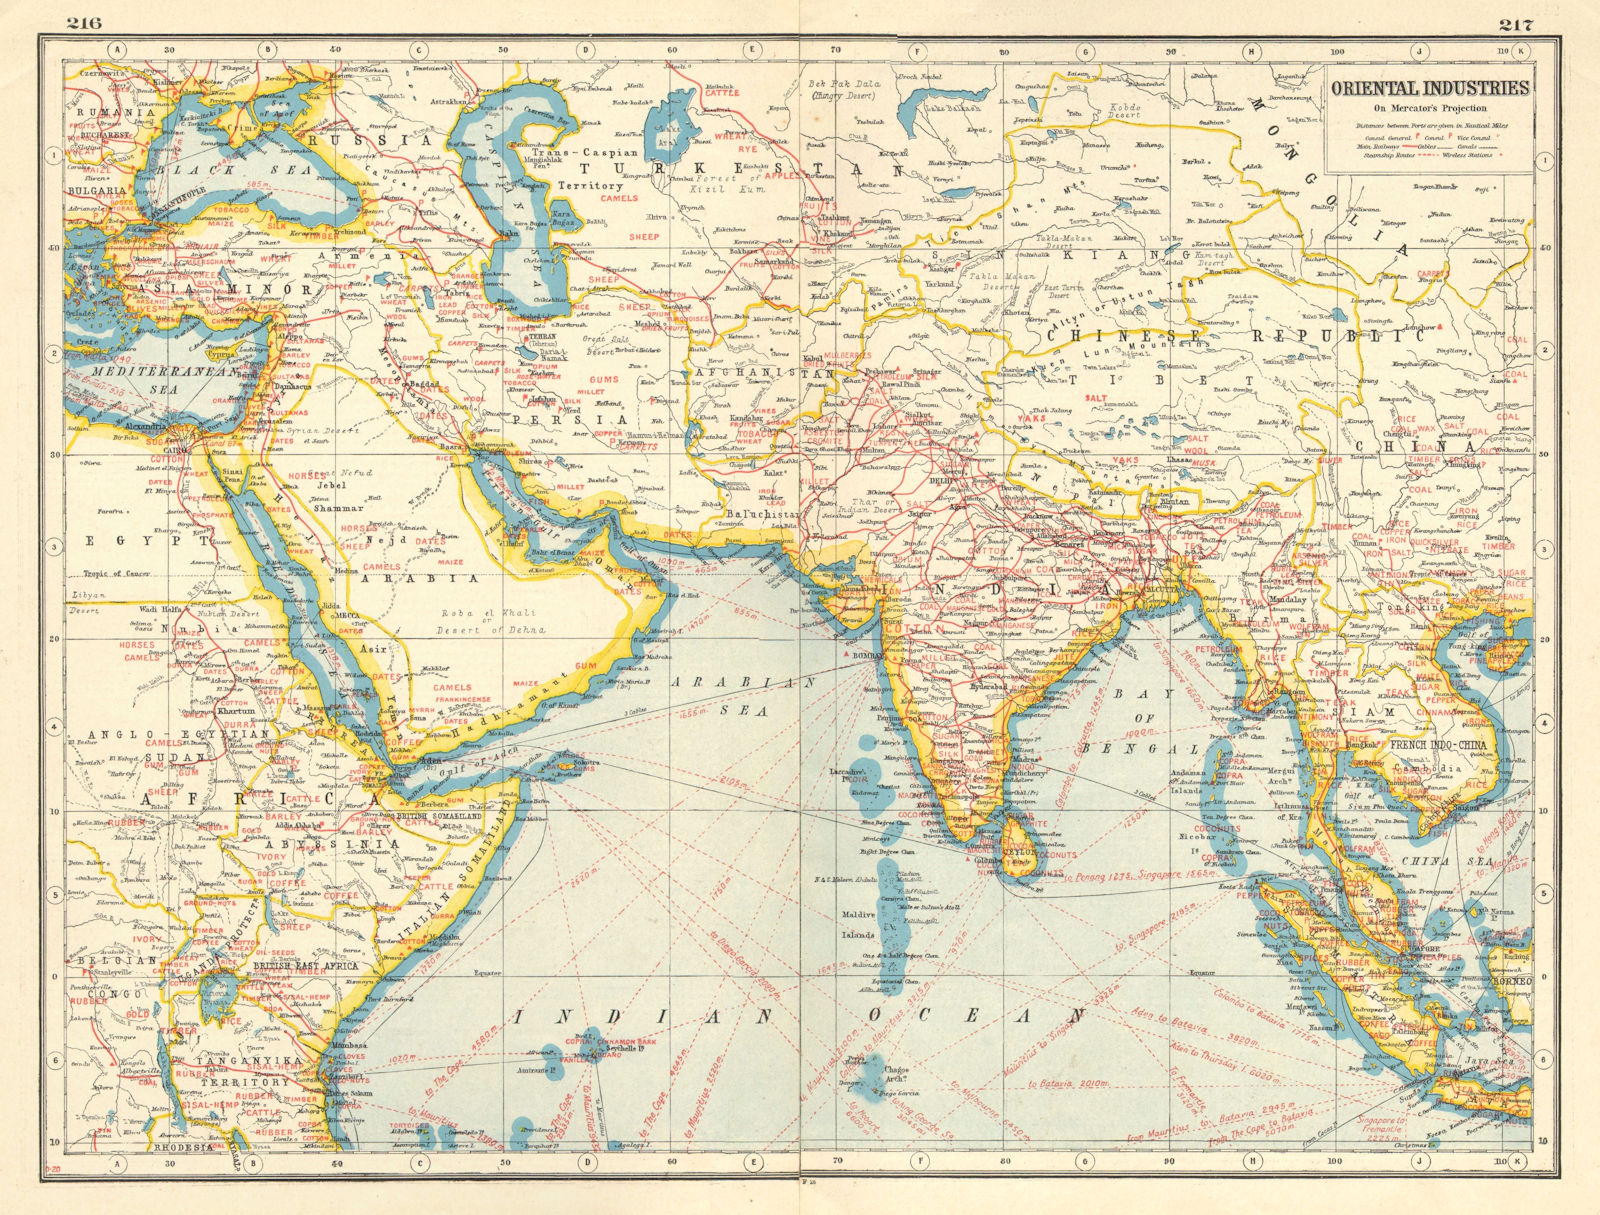 ASIA MIDDLE EAST AFRICA COMMERCIAL.Shows agricultural/mineral products 1920 map